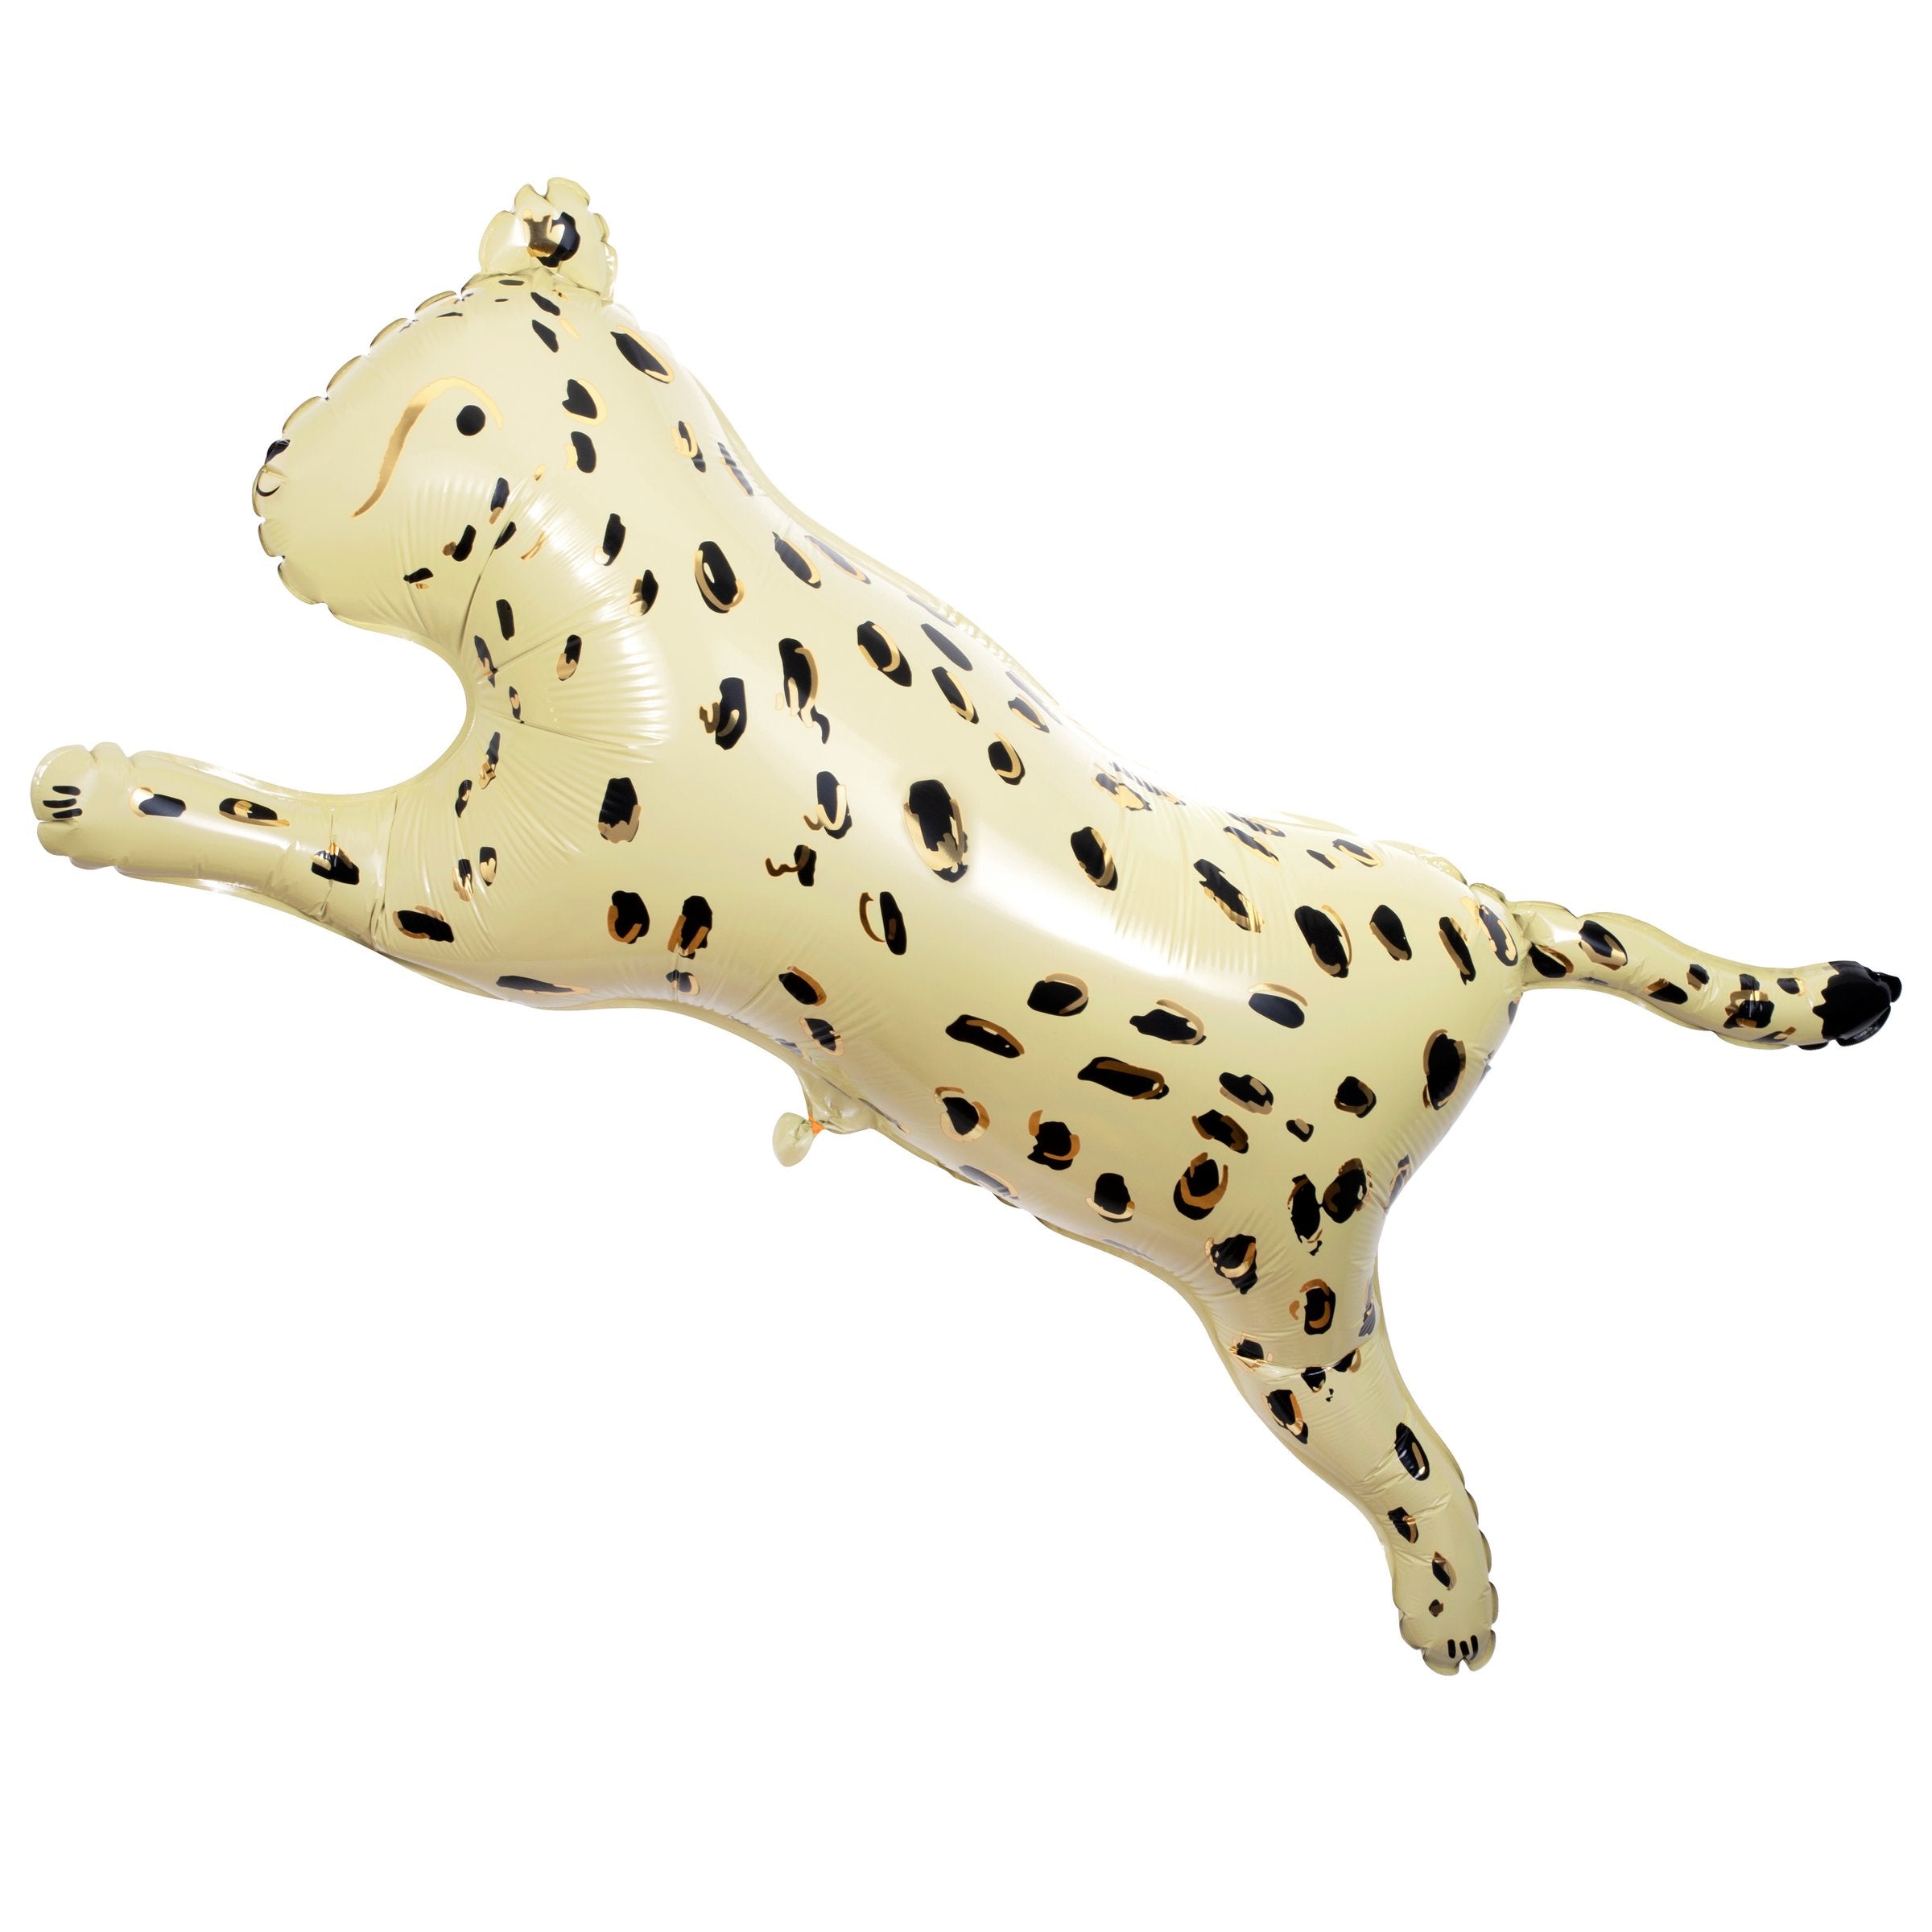 Our foil balloon, in the shape of a cheetah, is perfect for a safari party.